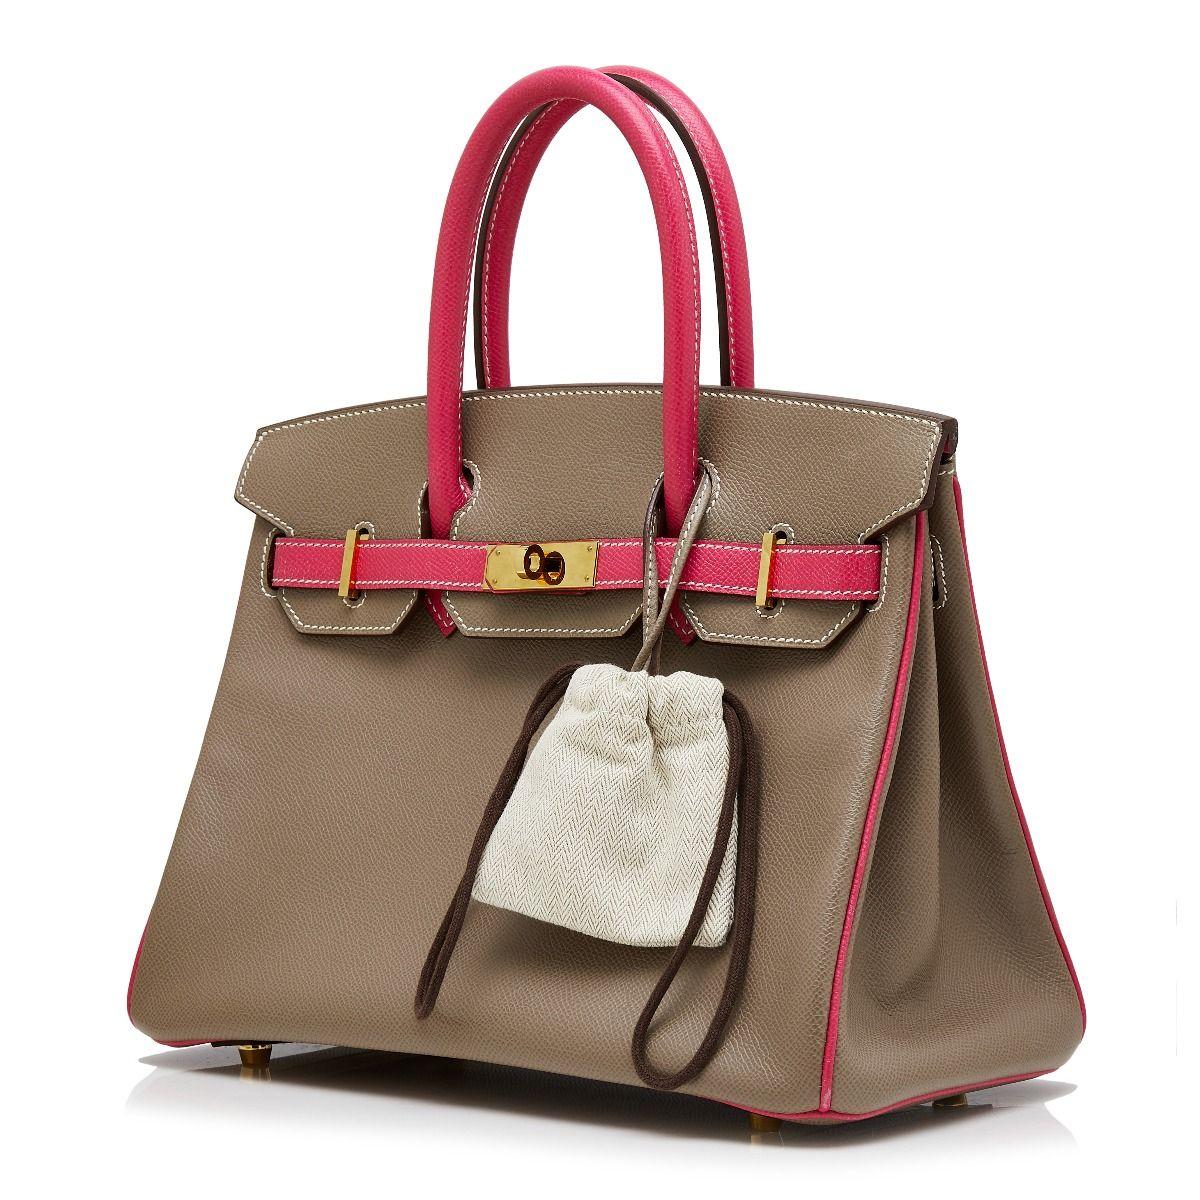 Adding a twist to the traditional Hermès Birkin, this Bi-colour HSS bag was specially made to order and showcases a neutral grey epsom leather exterior, which is offset by contrasting vivid pink top-handles, piping and belt arms and accented by